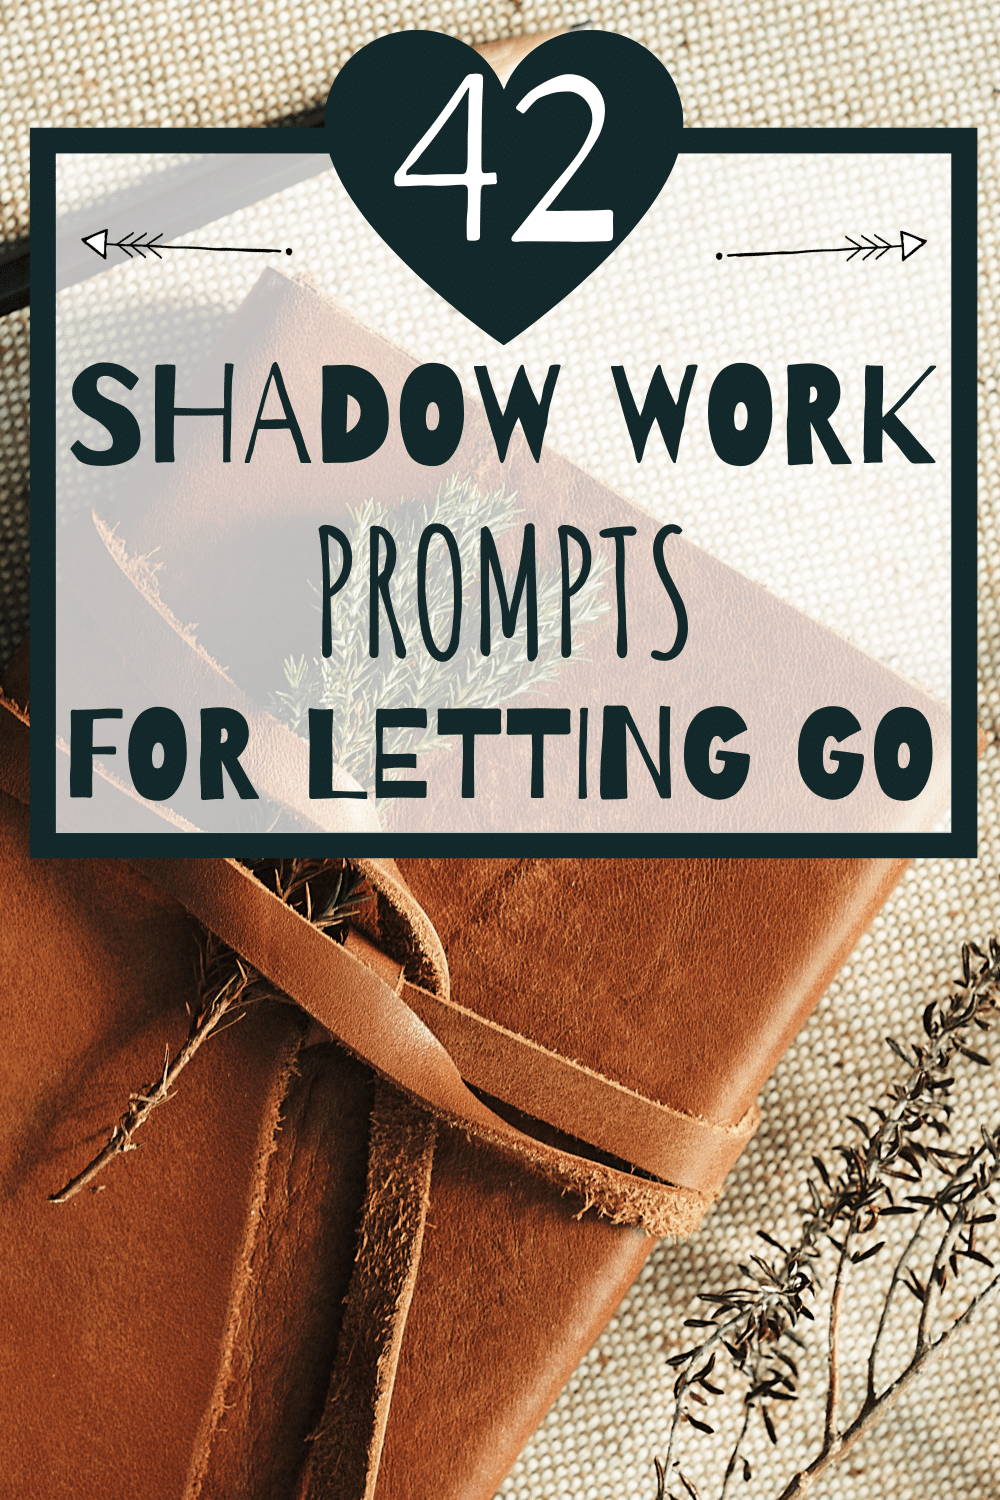 42 Shadow Work Prompts to Help Let Go of What's Holding You Back! Looking to let go of what's been holding you back? These 42 shadow work prompts can help. They're designed to help you access the hidden parts of yourself that might be sabotaging your happiness and success. Give them a try!